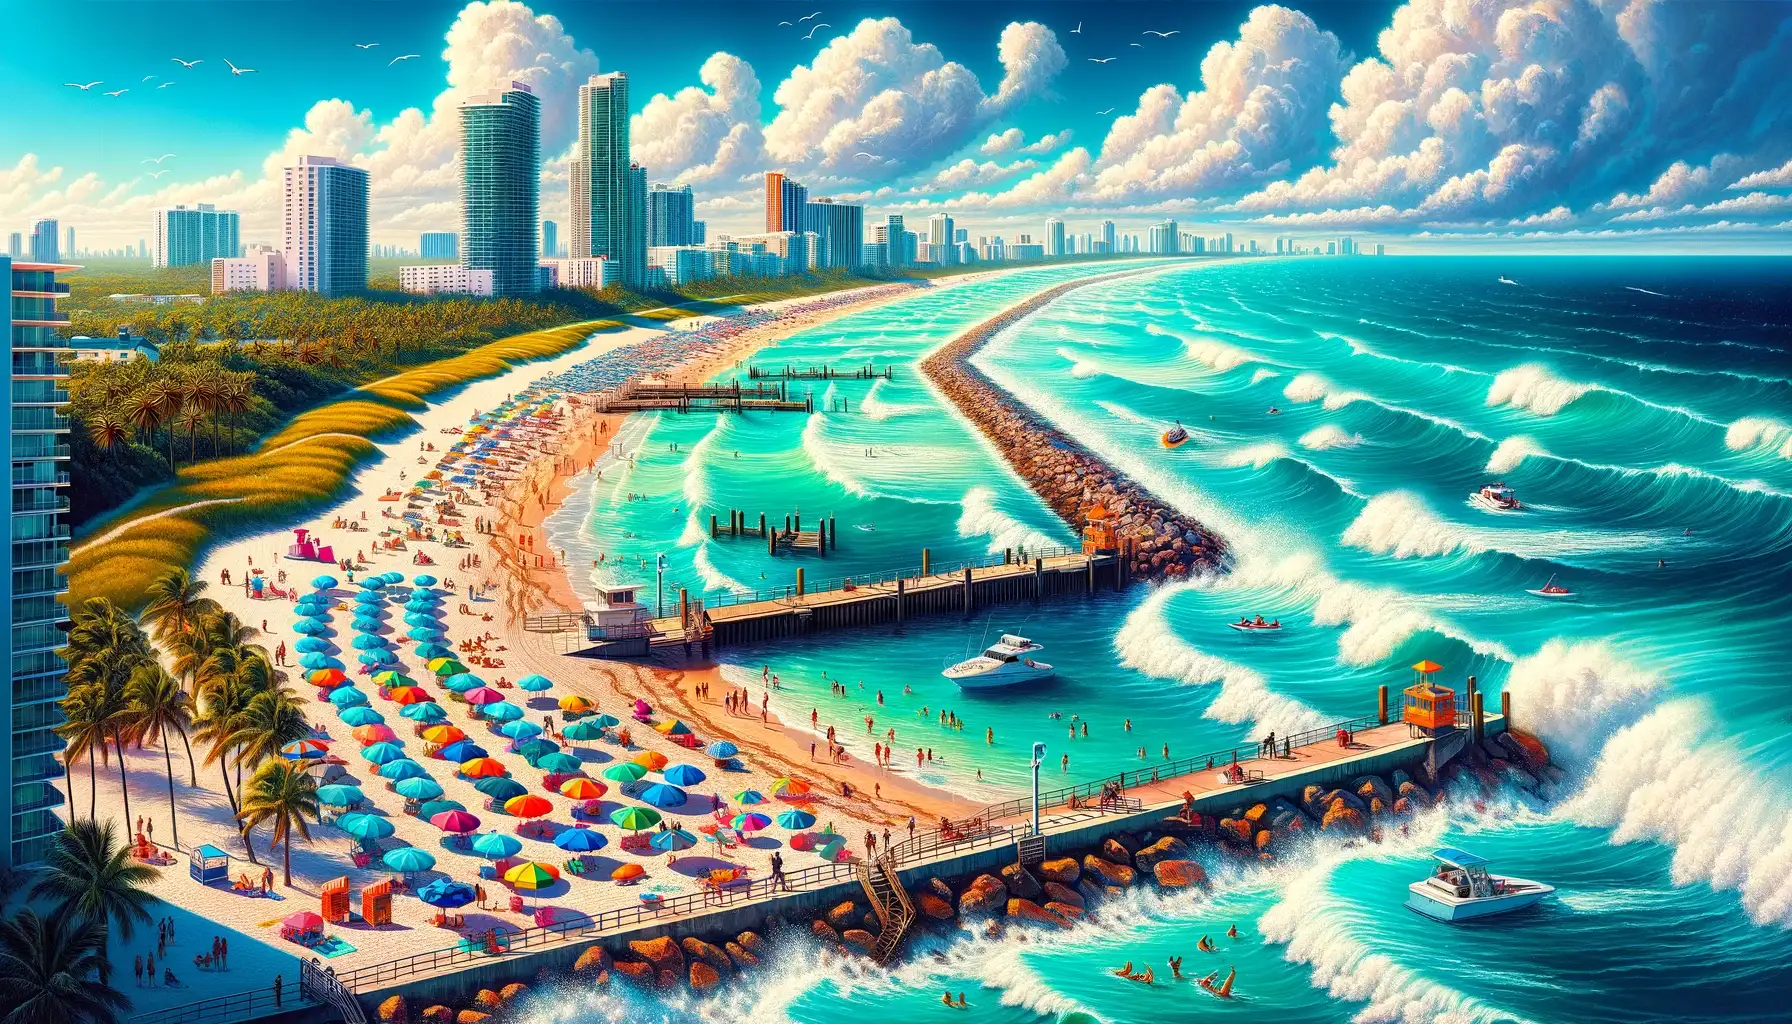 Scenic view of Haulover Inlet in Miami with clear blue waters, boats, and sandy beach, against a backdrop of Miami's skyline"